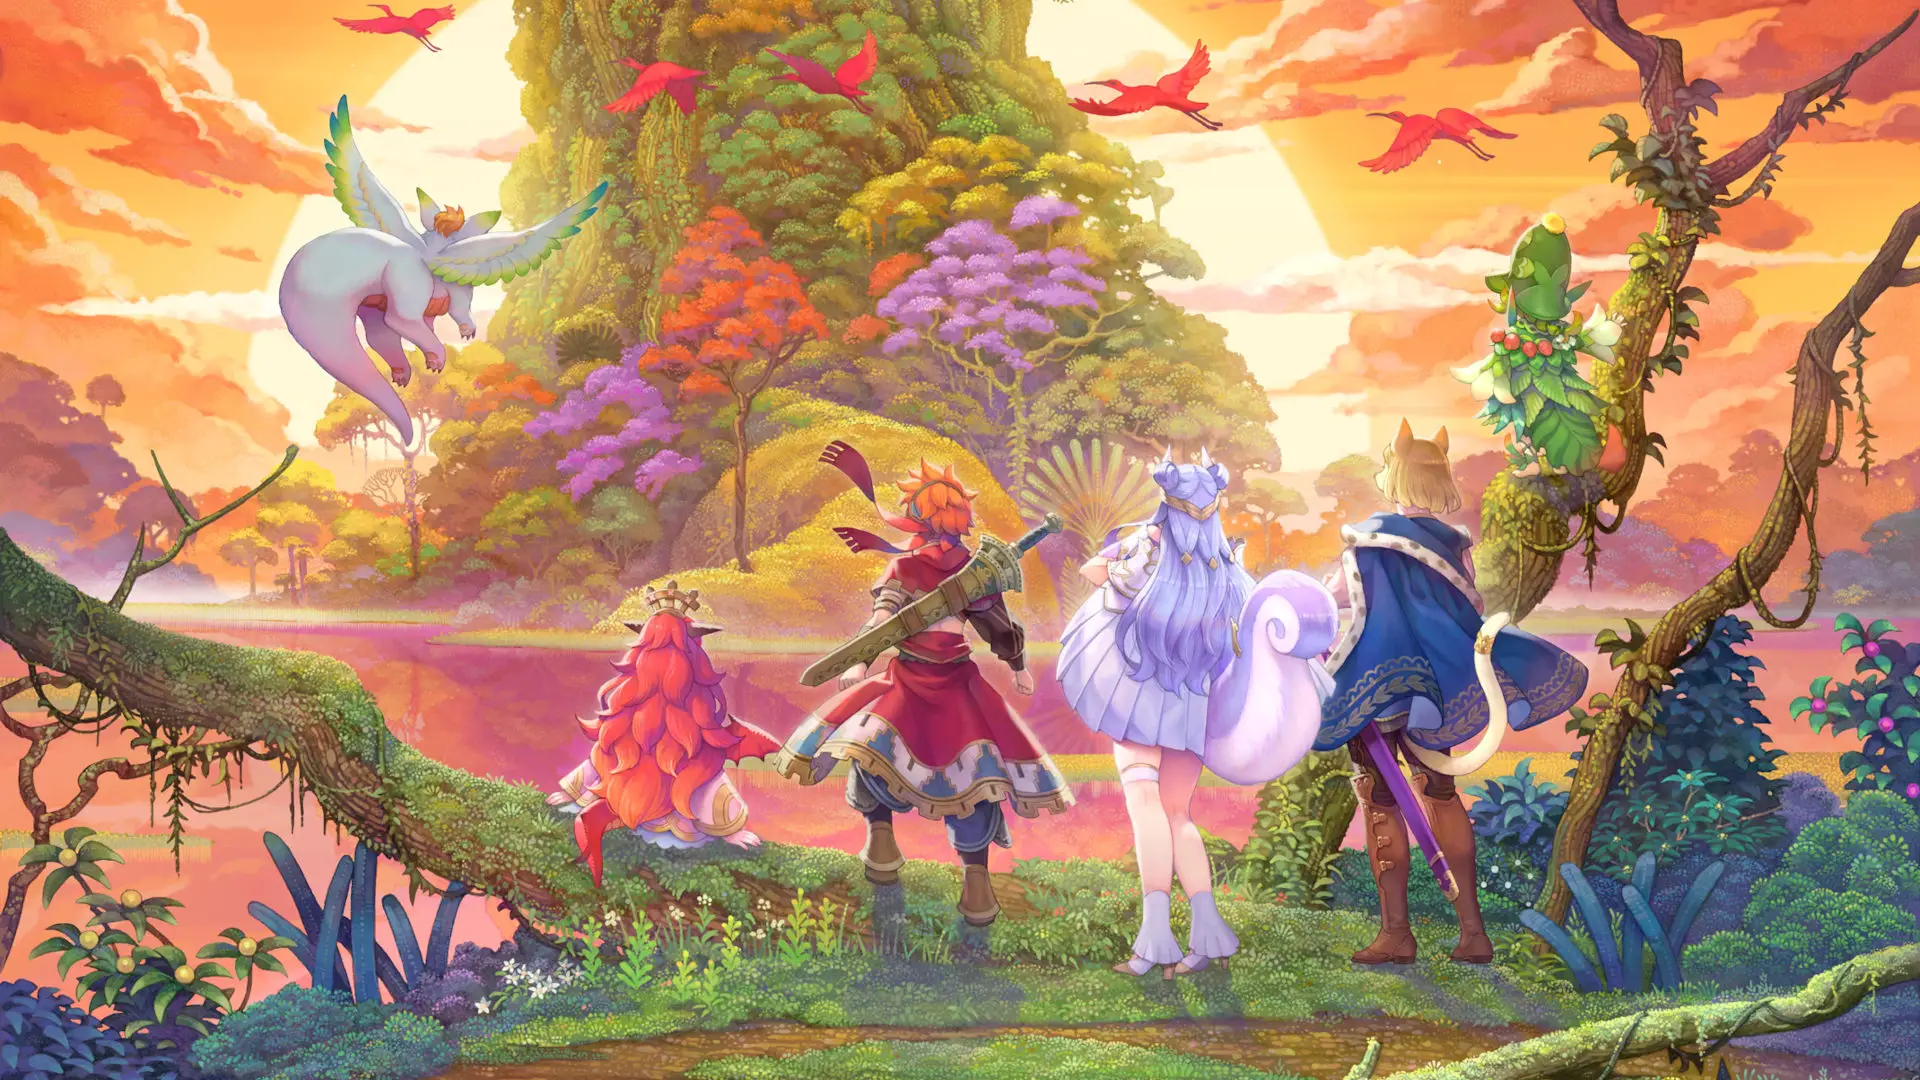 No Plans for Visions of Mana Coming to Game Pass, Confirms Microsoft